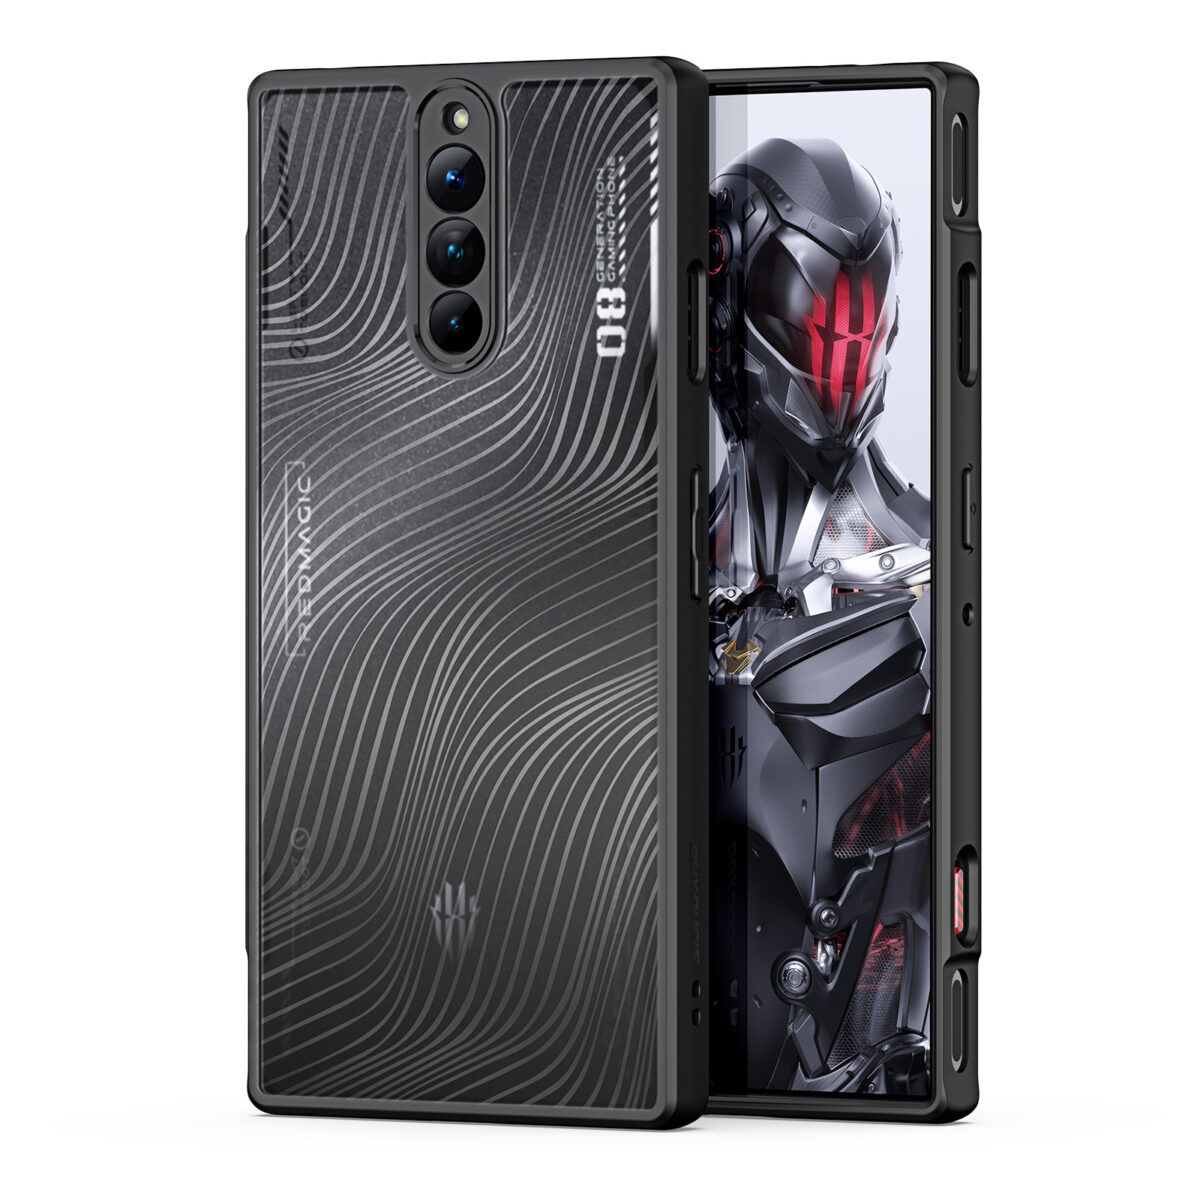 Aimo Series Back Cover for ZTE nubia Red Magic 8 Pro / 8 Pro Plus